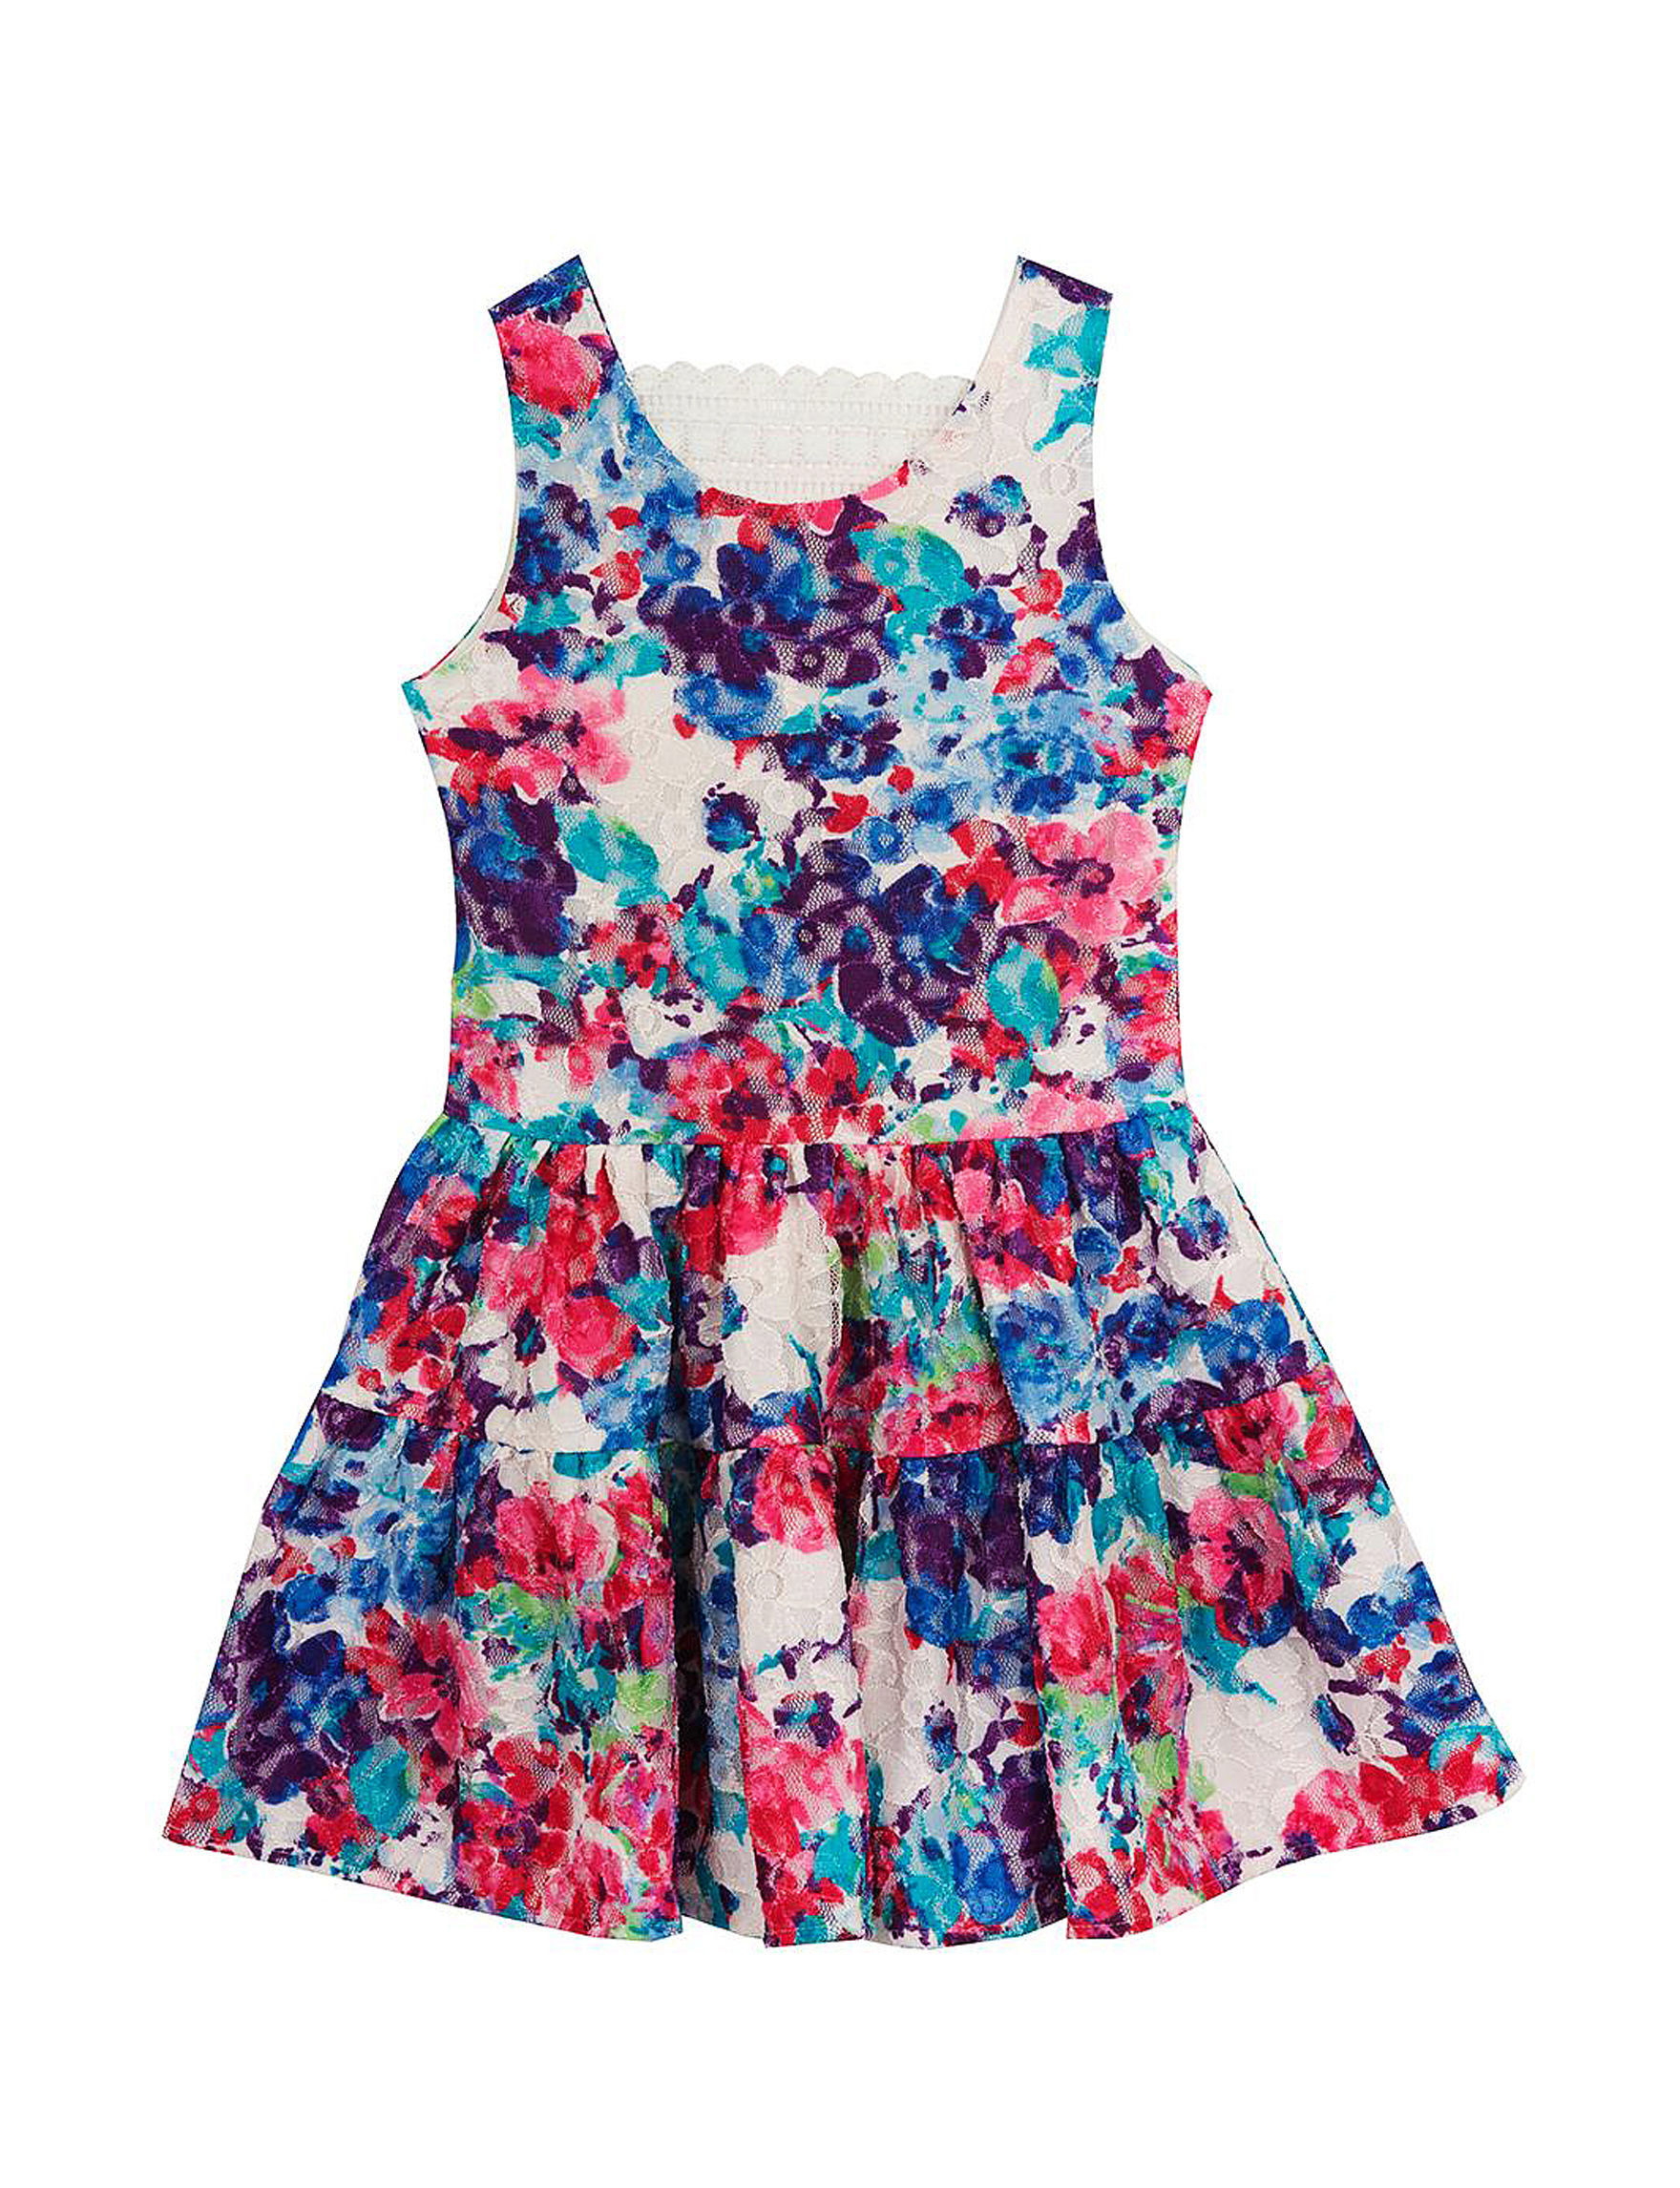 Rare Editions Floral Lace Dress - Girls 4-6x | Stage Stores